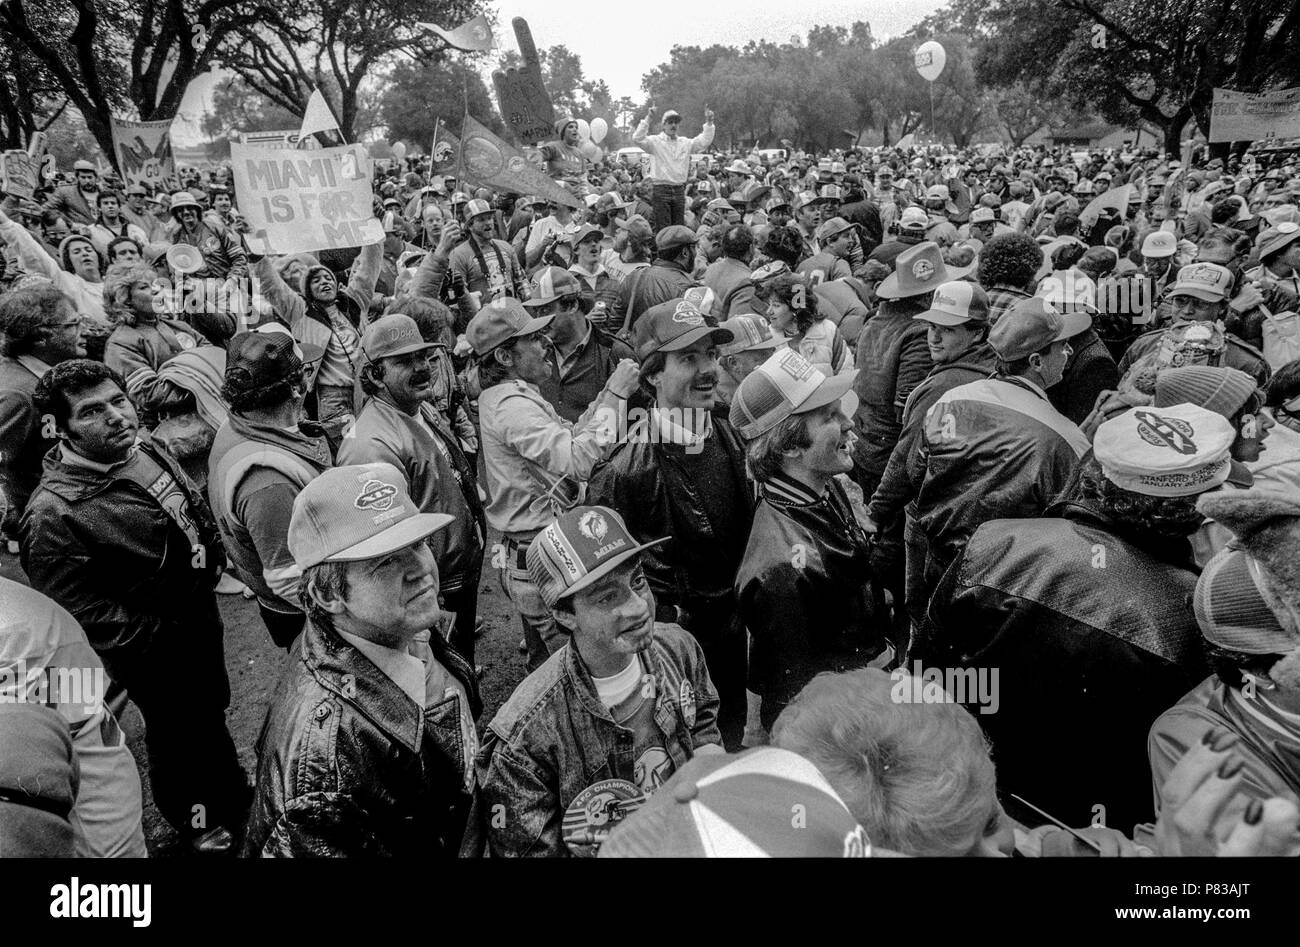 Stanford, California, USA. 20th Jan, 1985. Crowd files through gate 2 after leaving the Super Bowl XIX tailgate on the Stanford University campus. The San Francisco 49ers defeated the Miami Dolphins 38-16 on Sunday, January 20, 1985. Credit: Al Golub/ZUMA Wire/Alamy Live News Stock Photo